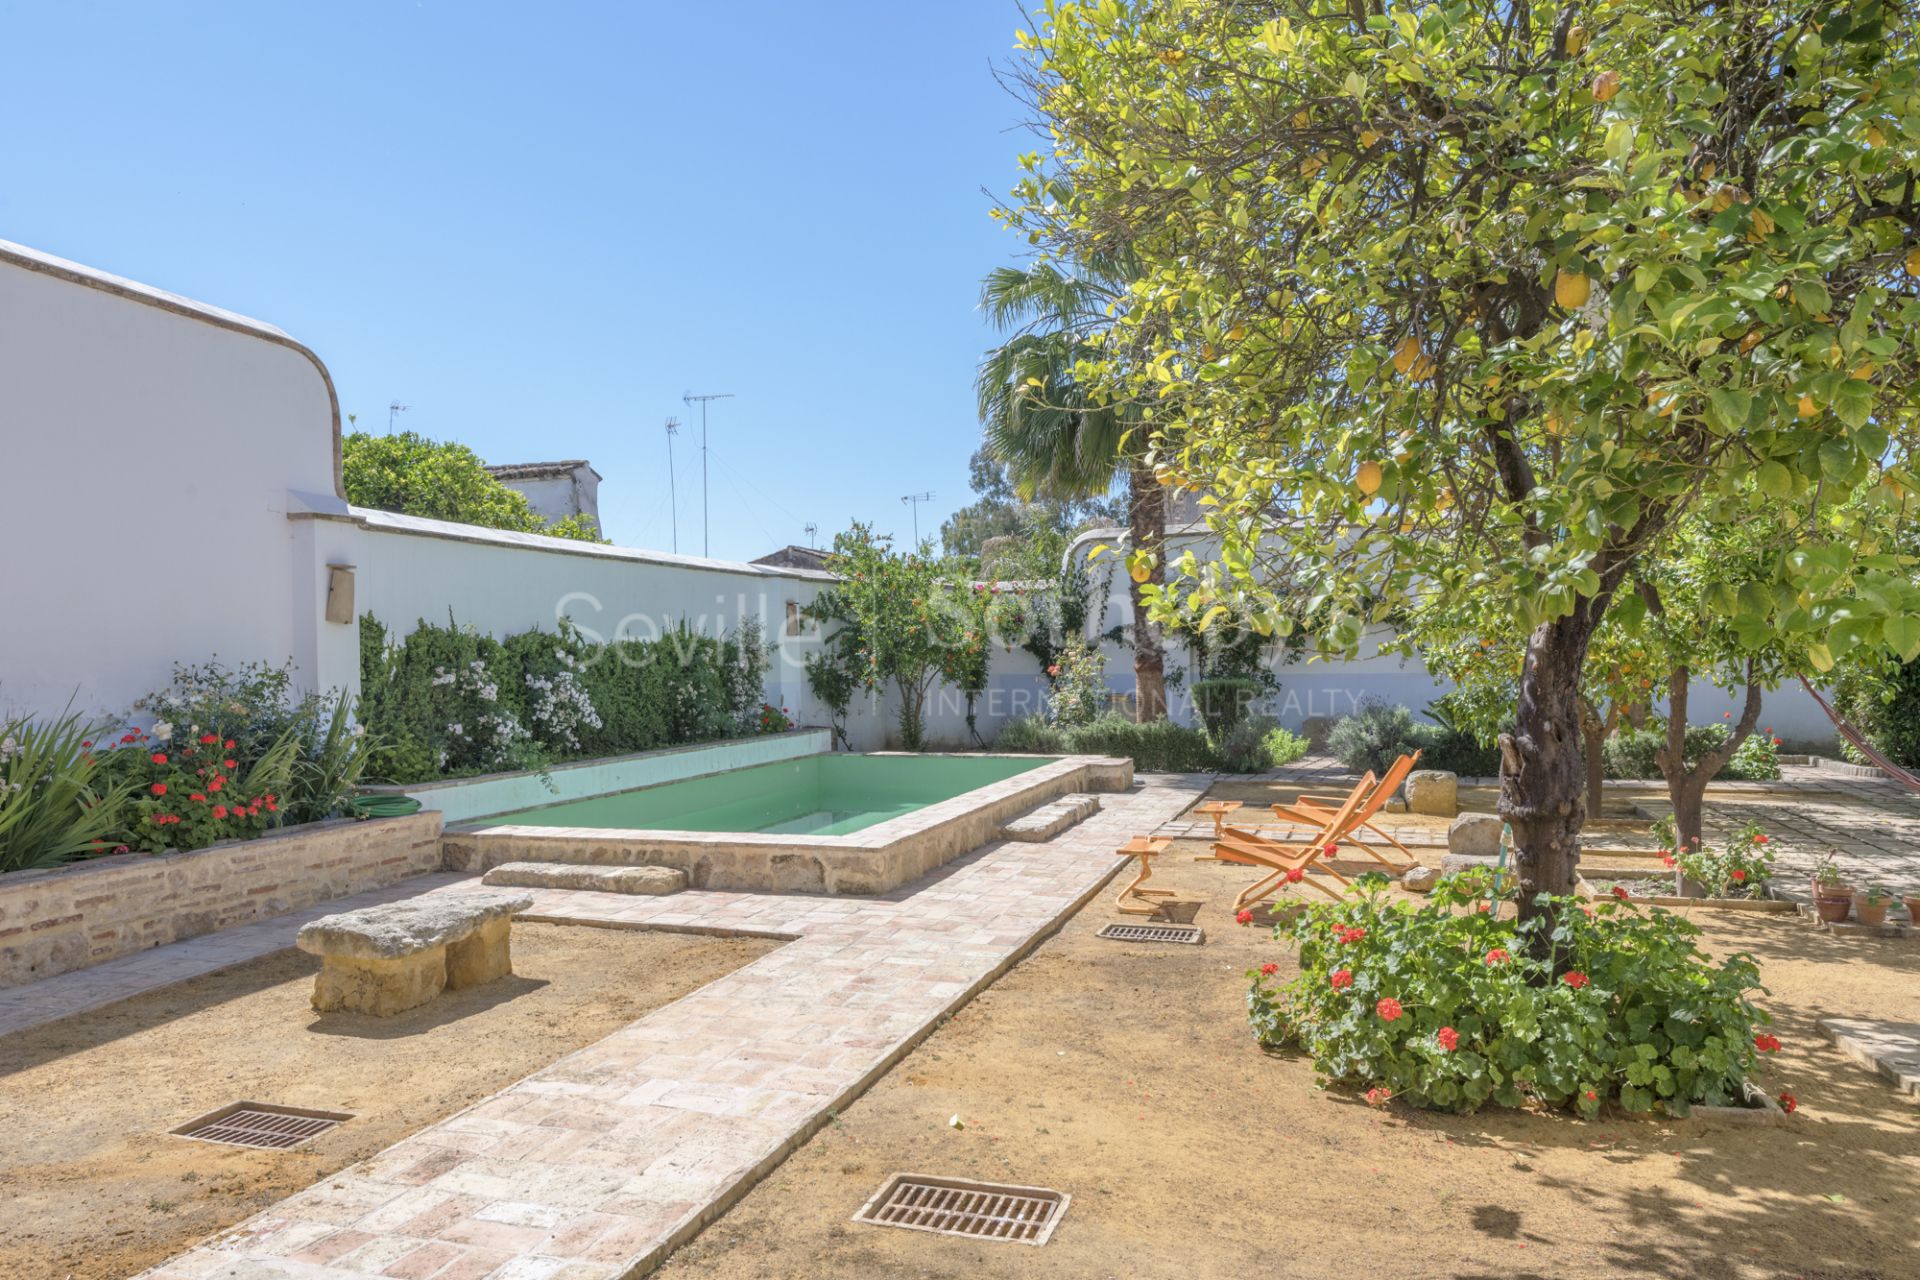 House decorated by Jaime Parladé with private swimming pool. Short term rental.